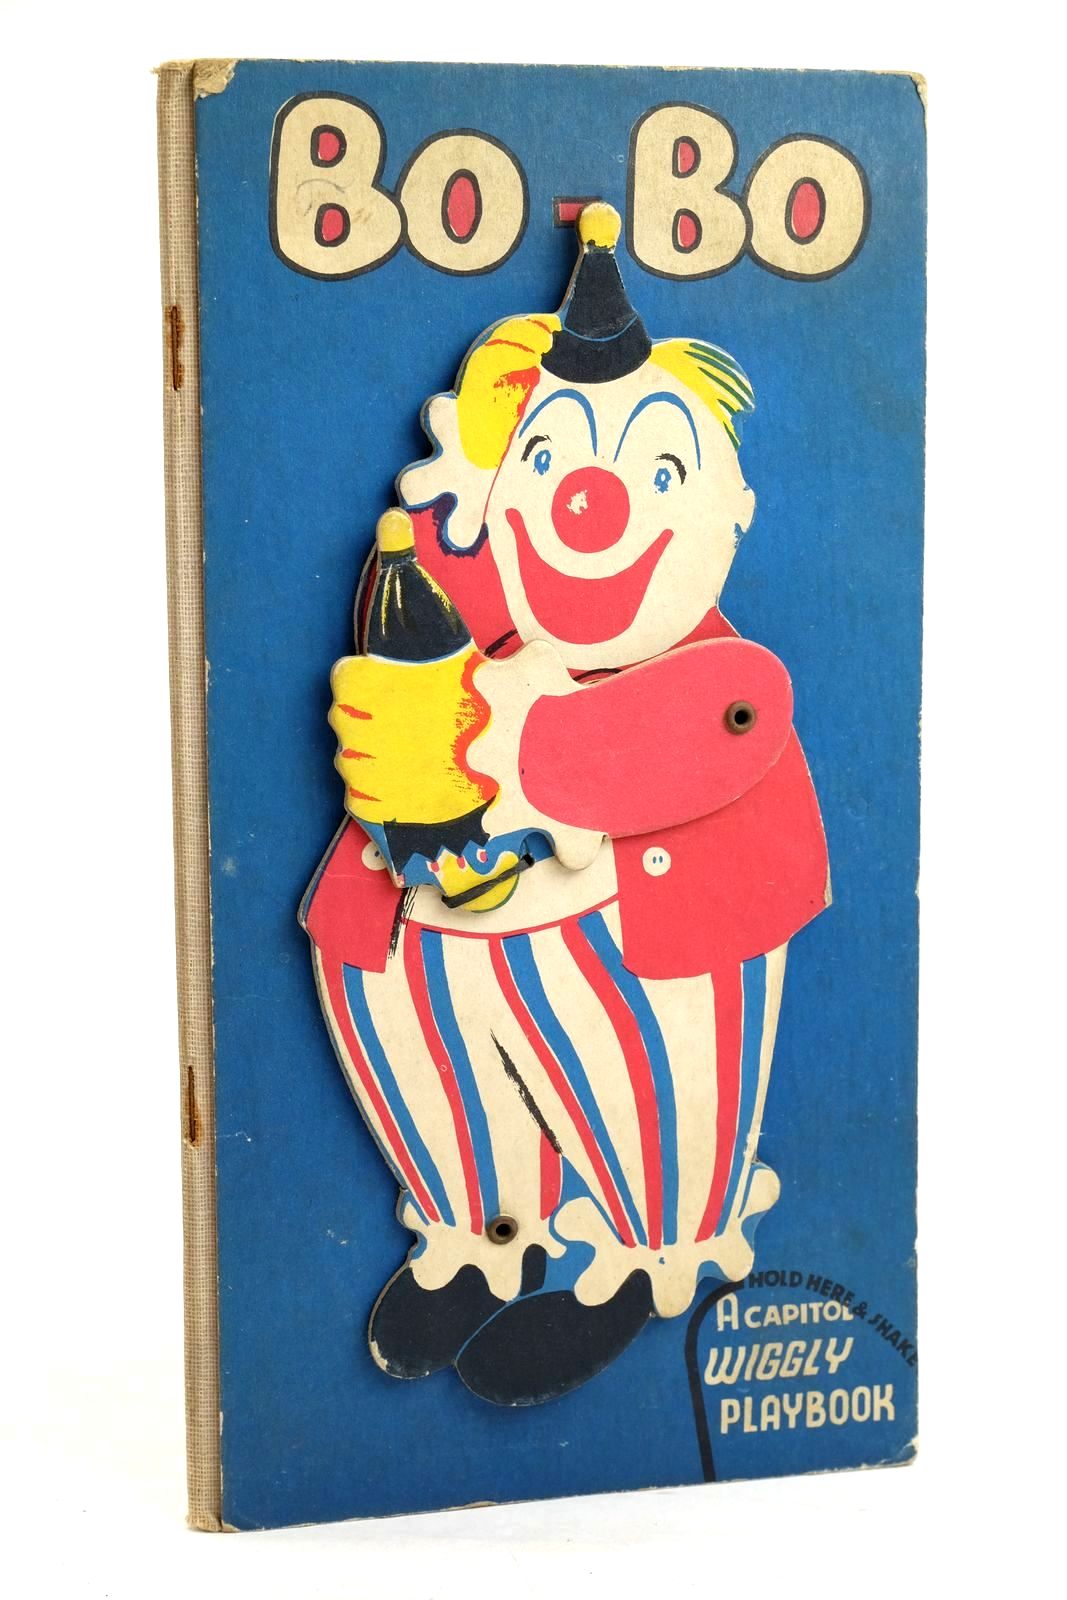 Photo of BO-BO THE CLOWN written by Porter, illustrated by Chollick, published by Capitol Publishing Co. (STOCK CODE: 1320458)  for sale by Stella & Rose's Books